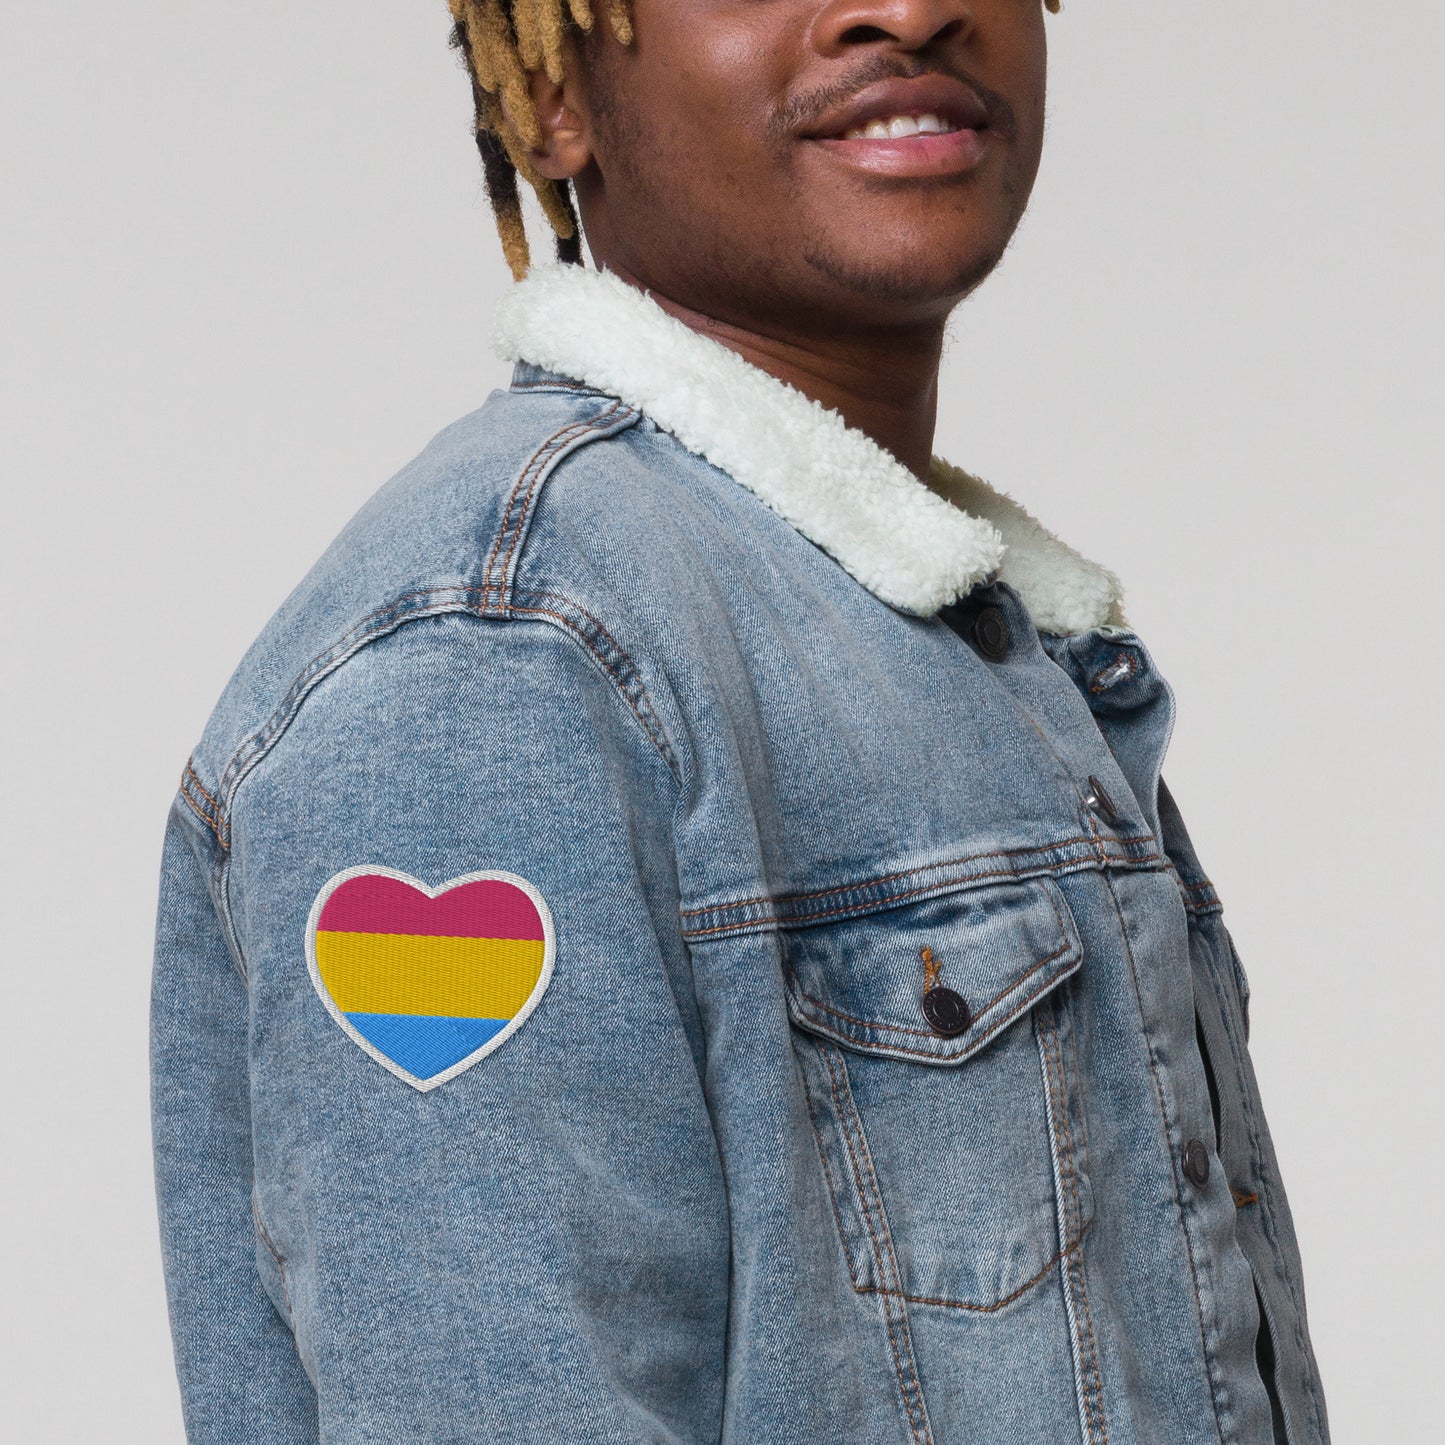 Pansexual Embroidered patches